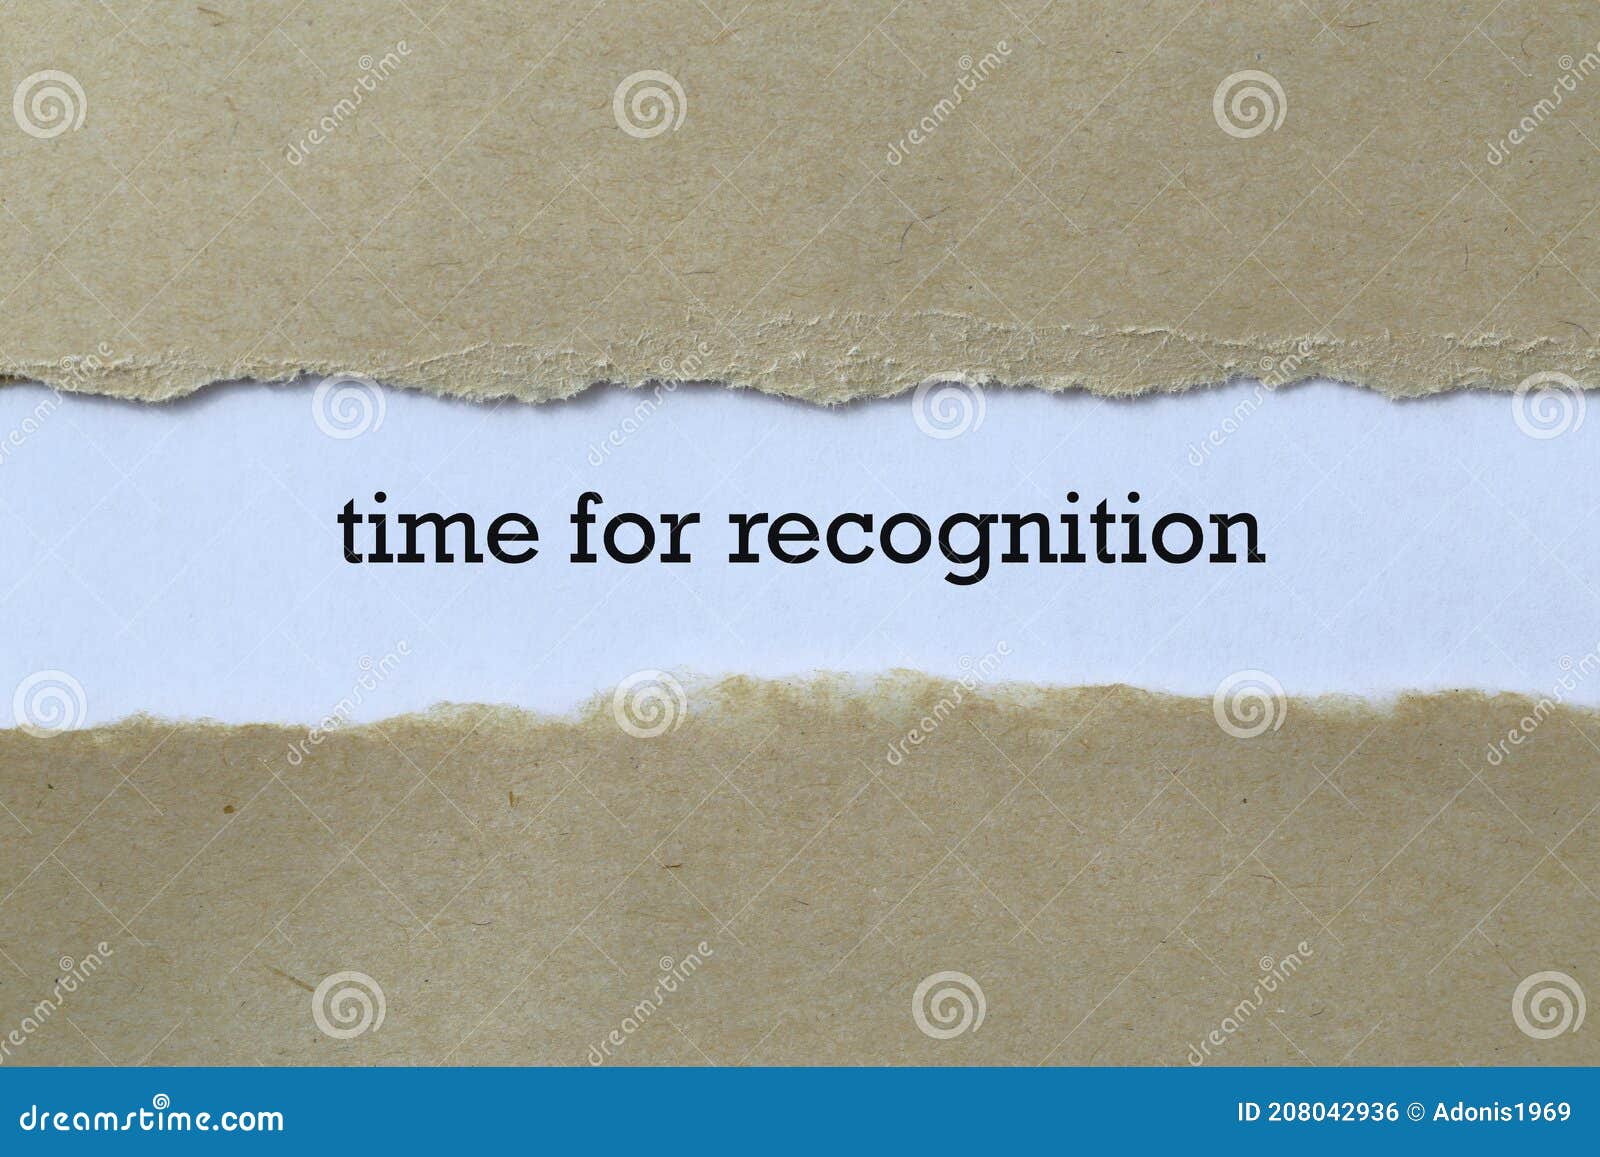 time for recognition on paper